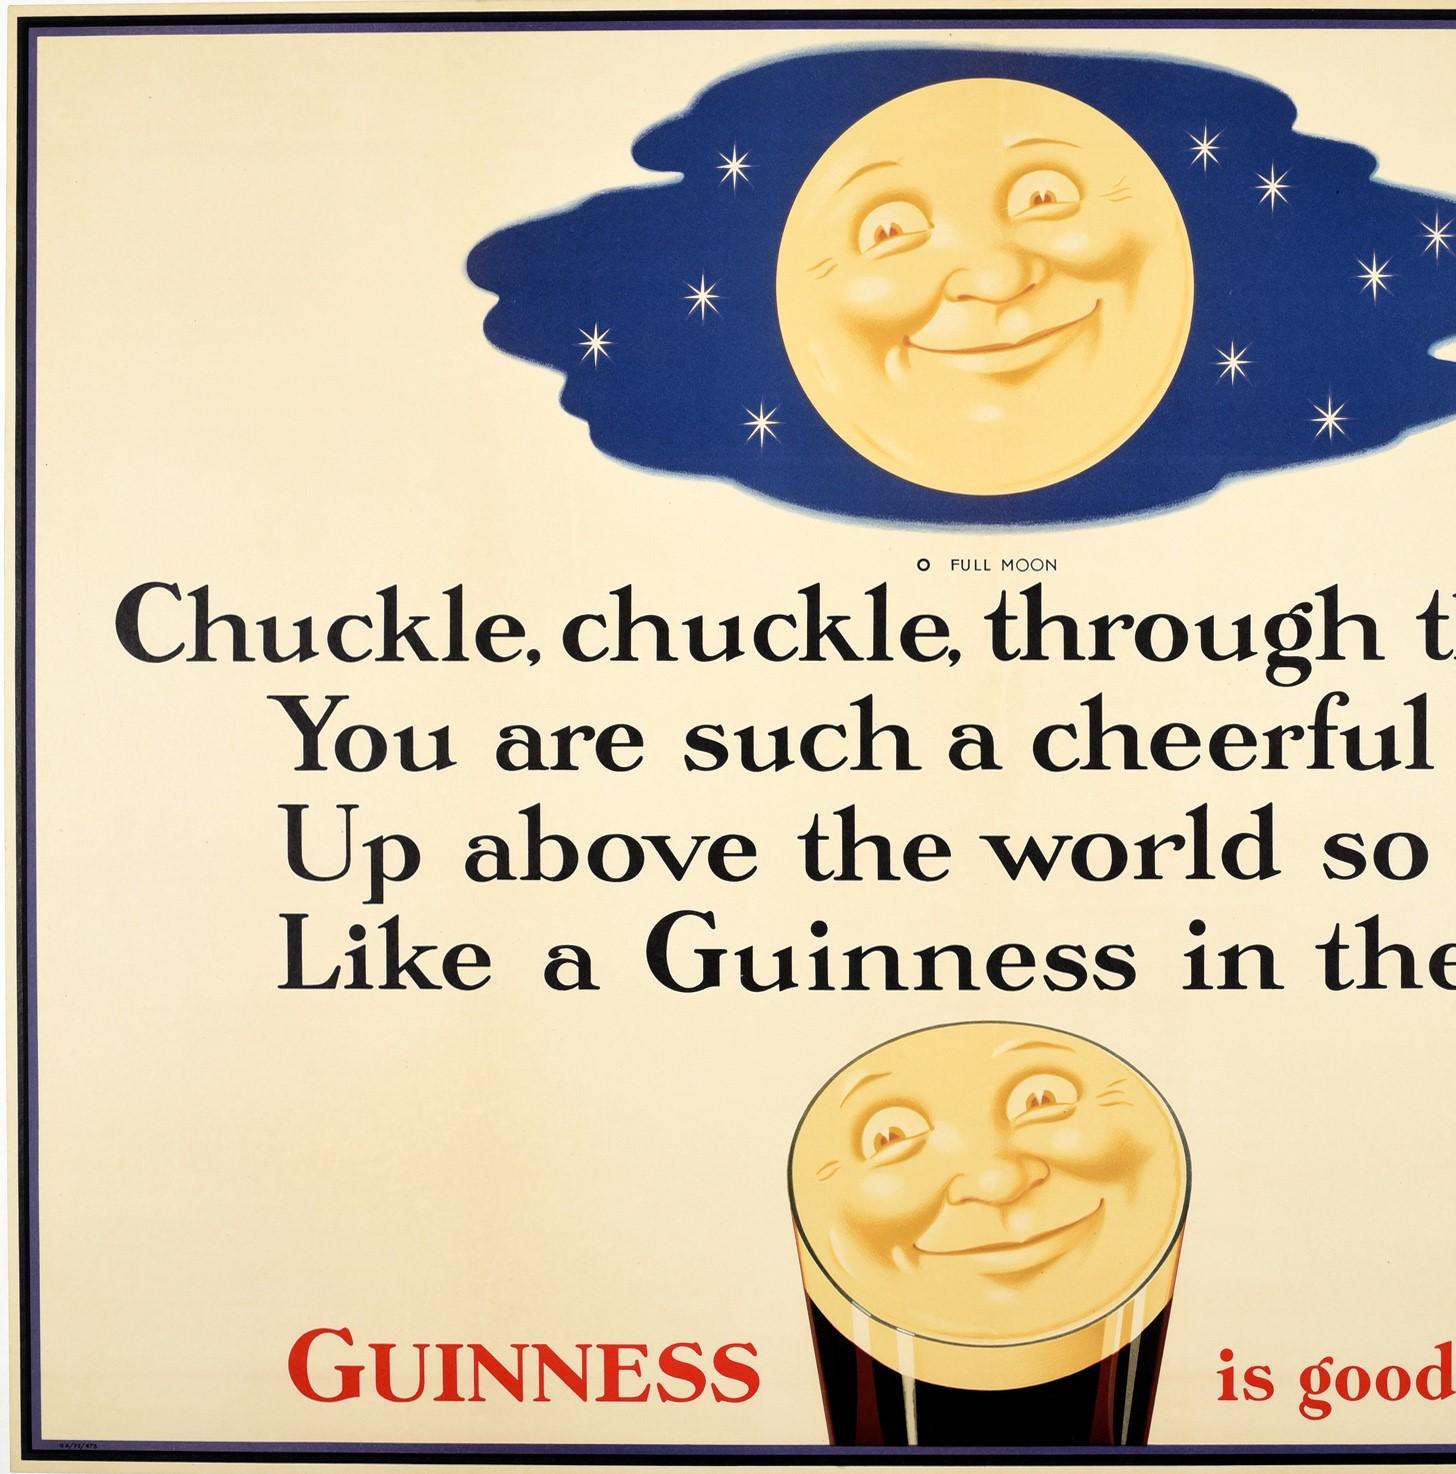 Original vintage advertising poster for Guinness - Guinness is Good for You - featuring a fun and colorful cartoon style image of the iconic smiling Guinness face reflected on the top of a pint glass with the smiling moon in a starry night sky